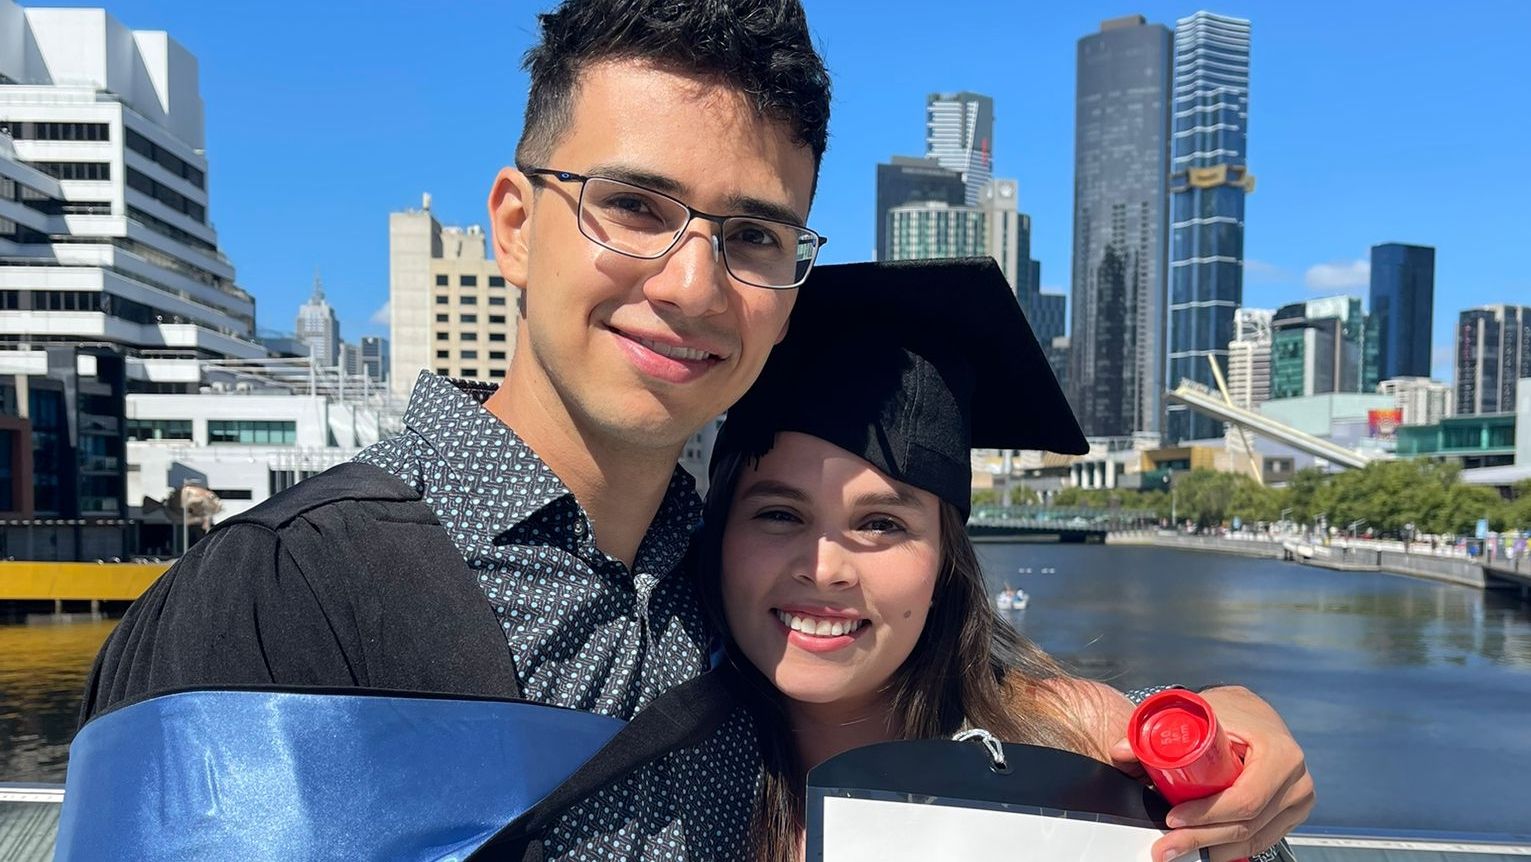 A man and woman are in front of the Melbourne skyline they are wearing graduation gowns